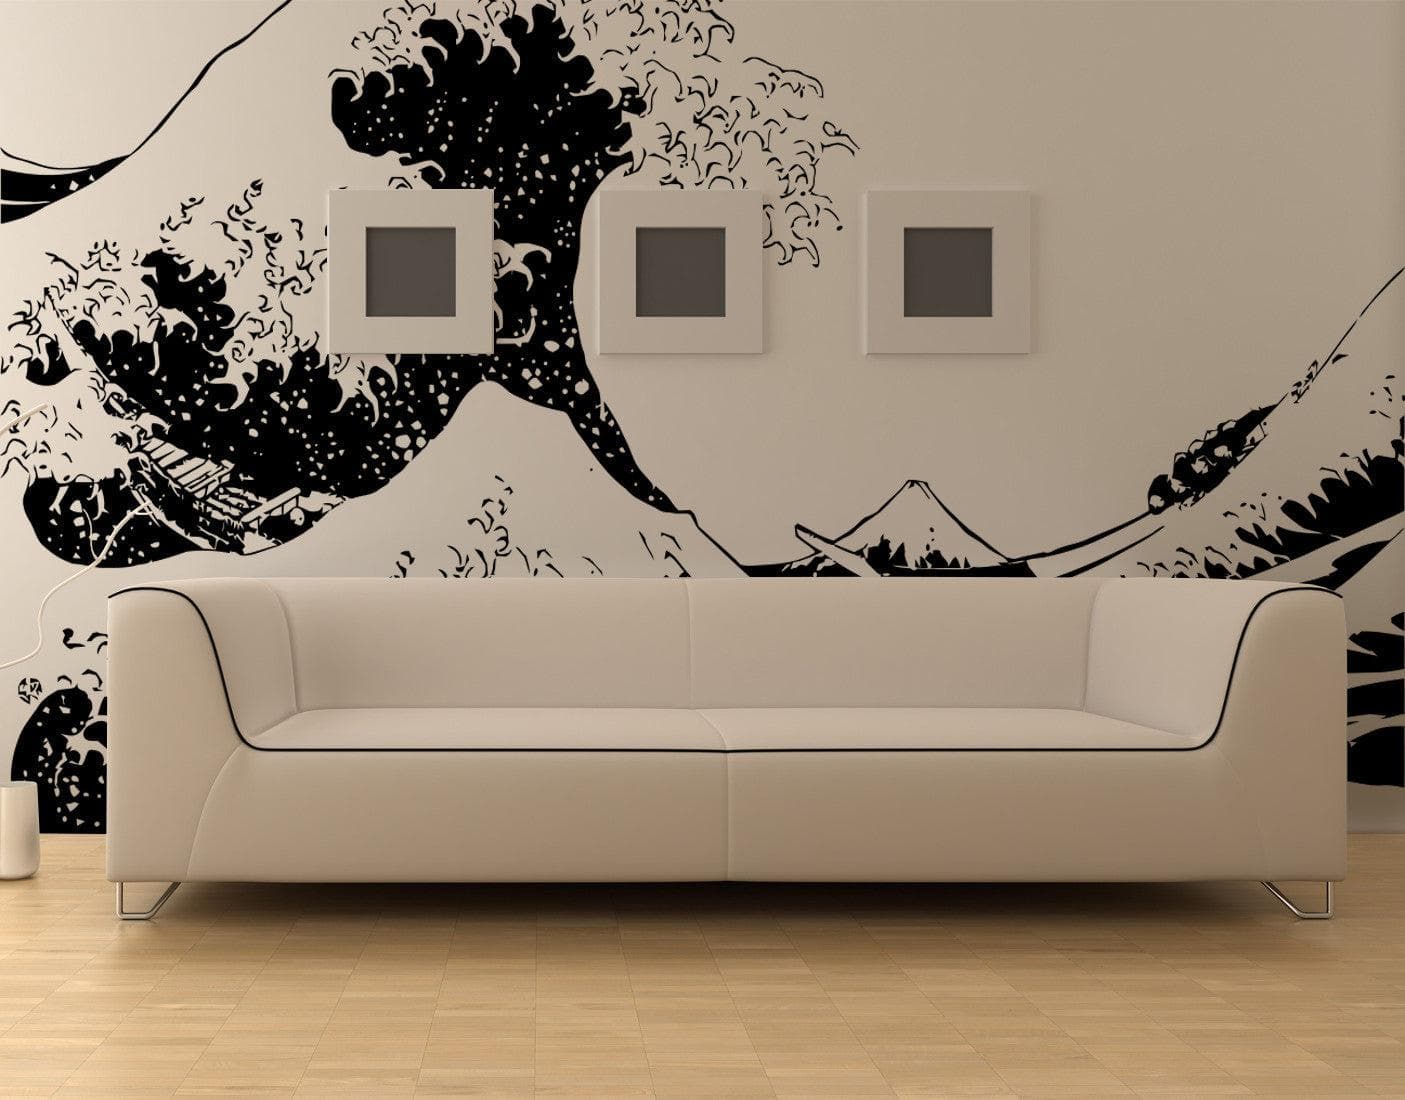 The Great Wave wall decal on a white wall in a living room.